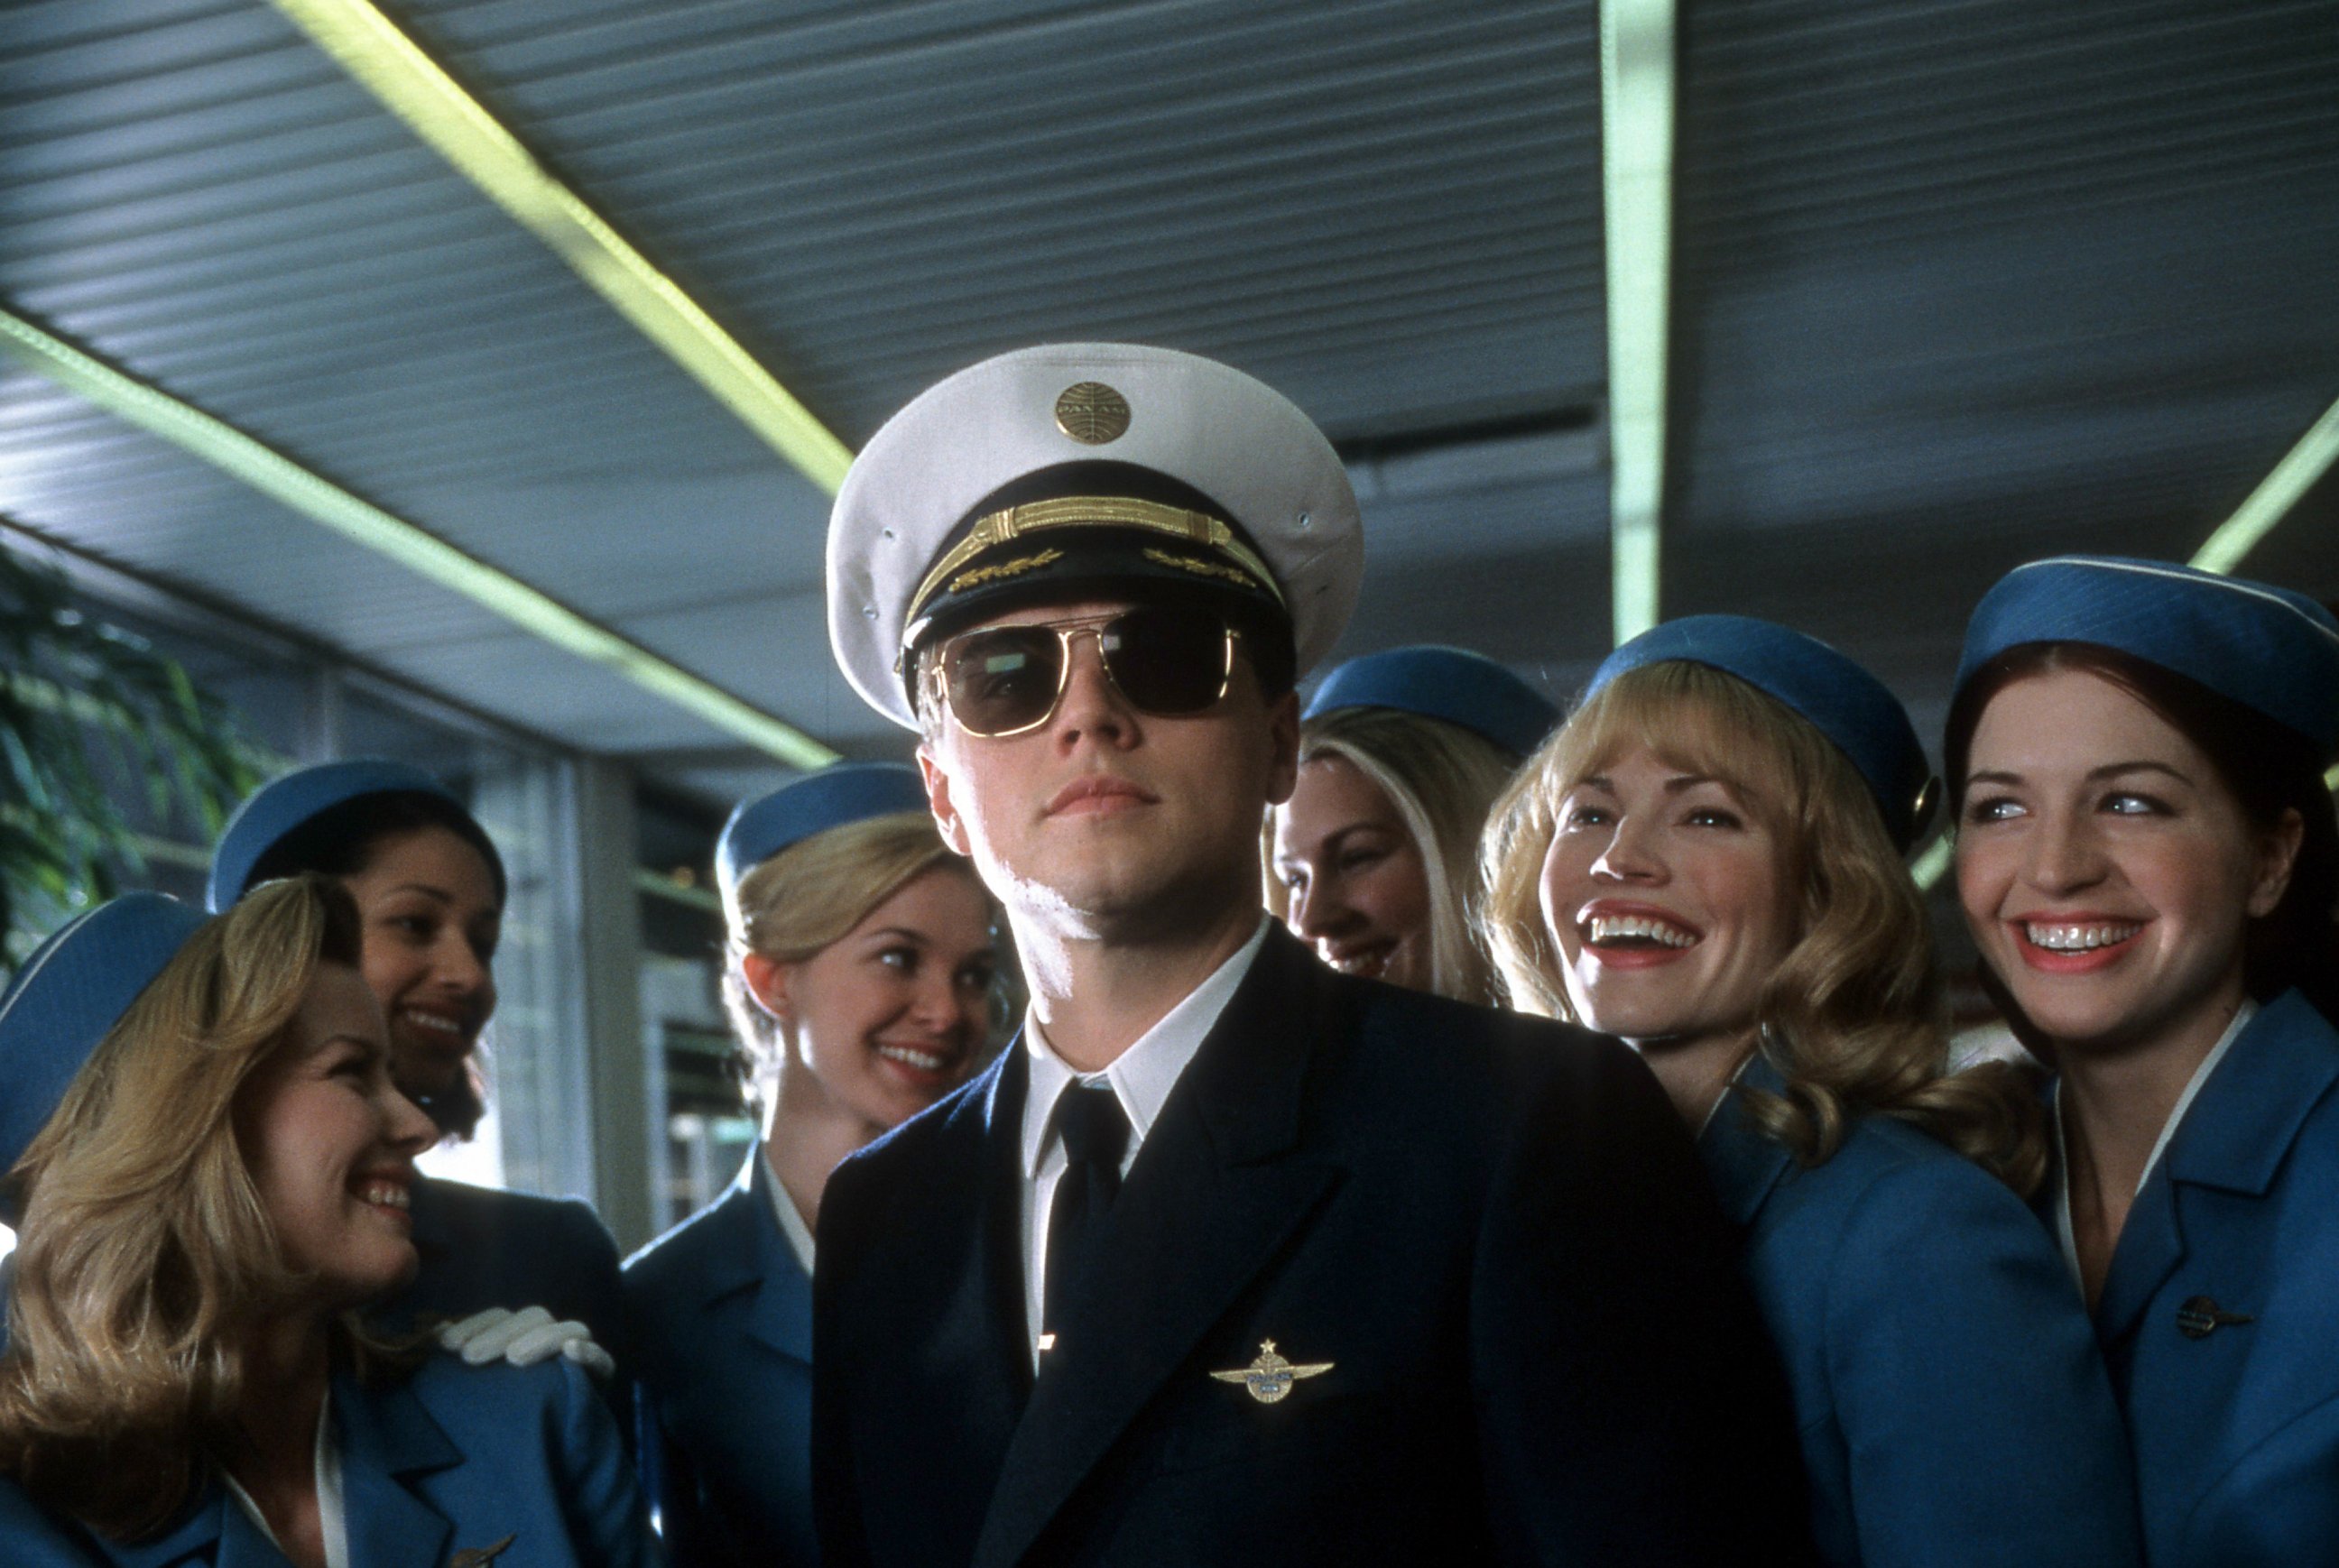 PHOTO: Leonardo DiCaprio with airline stewardess surrounding him in a scene from the film 'Catch Me If You Can', 2002.